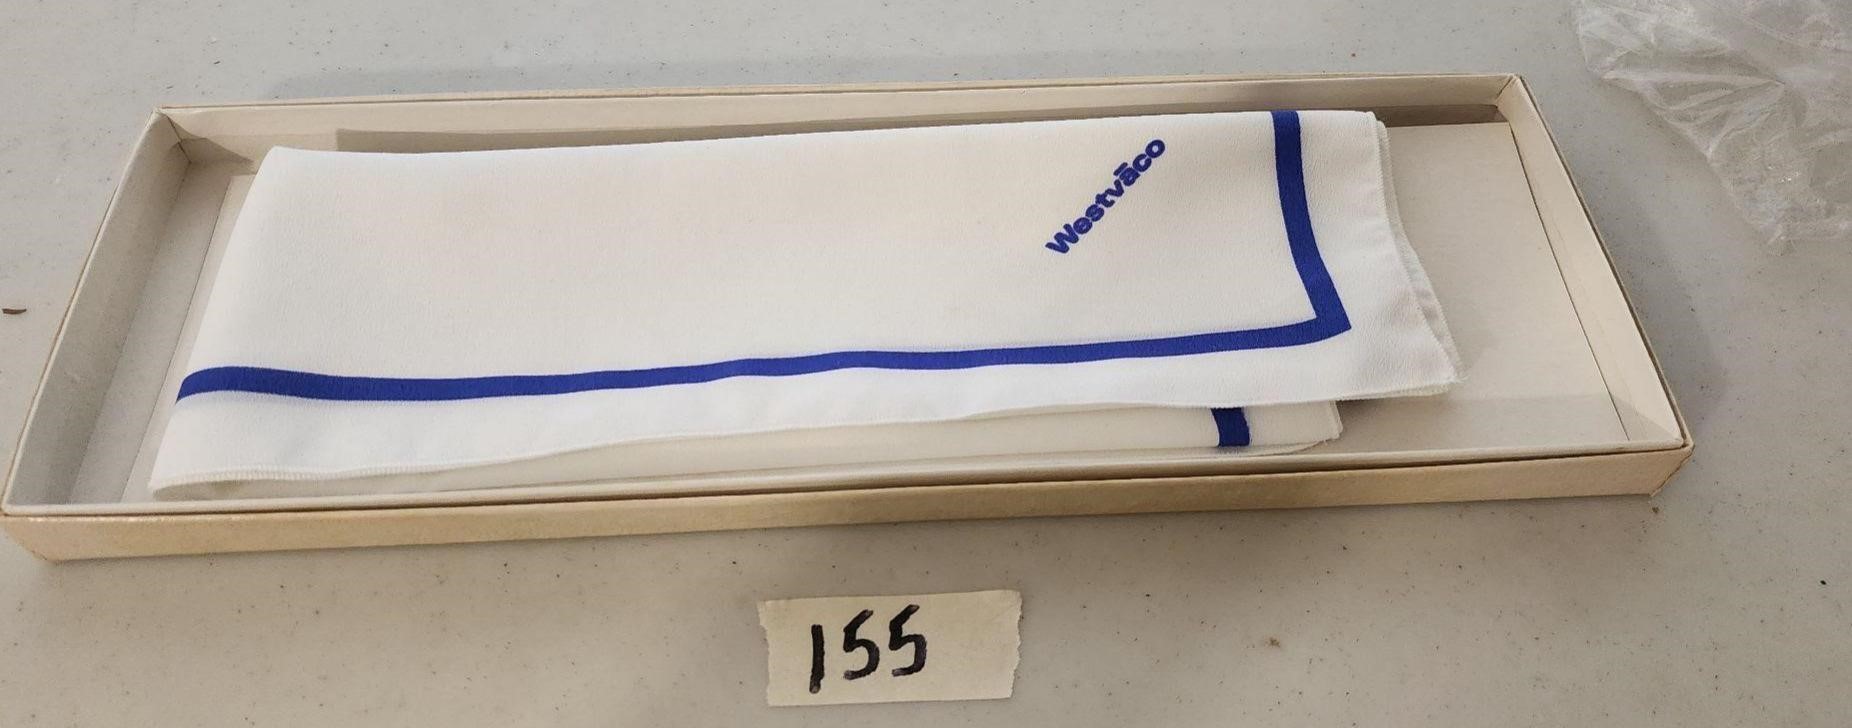 Westvaco Employee Appriciation Gift Rare Vintage